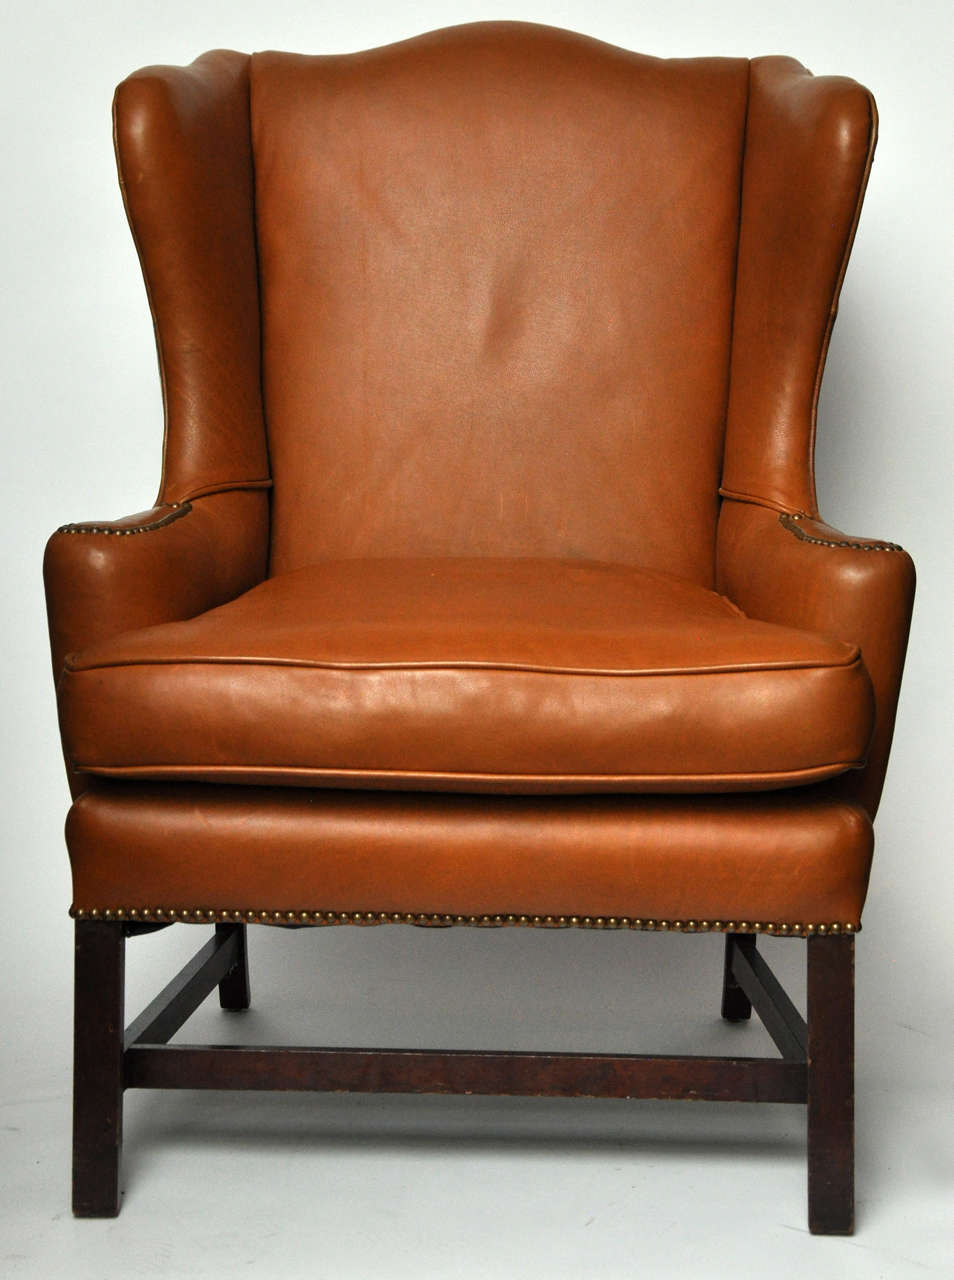 Leather Wing Chair with Provincial Cotton Back Upholstery, Mid-Century. Hardwood Frames